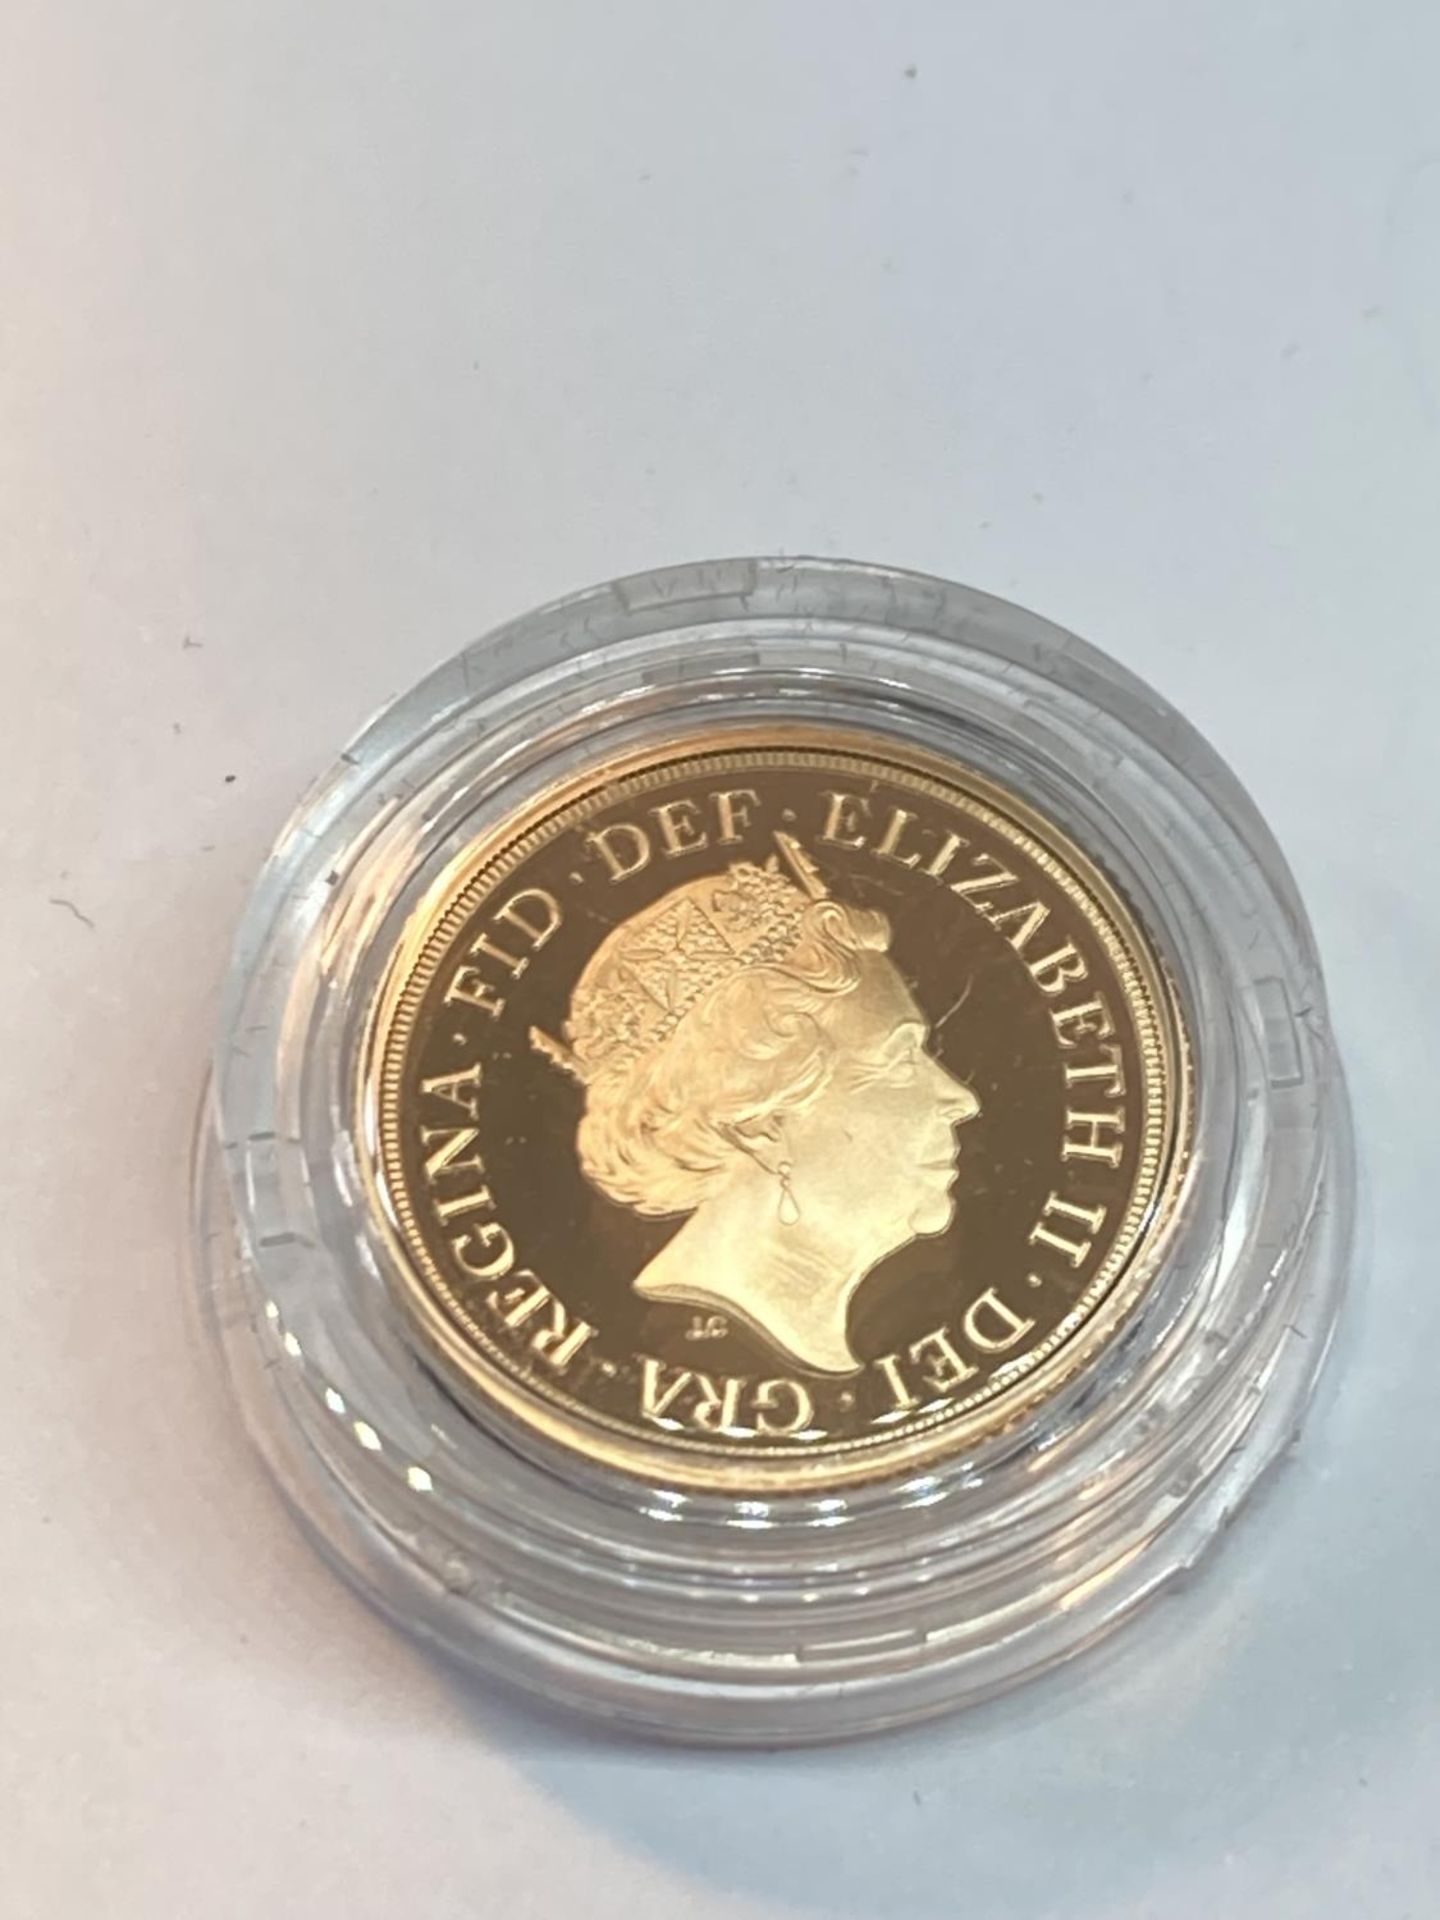 A 2018 THE SOVEREIGN GOLD PROOF LIMITED EDITION NUMBER 2,555 OF 10,500 IN A WOODEN BOXED CASE - Image 3 of 5